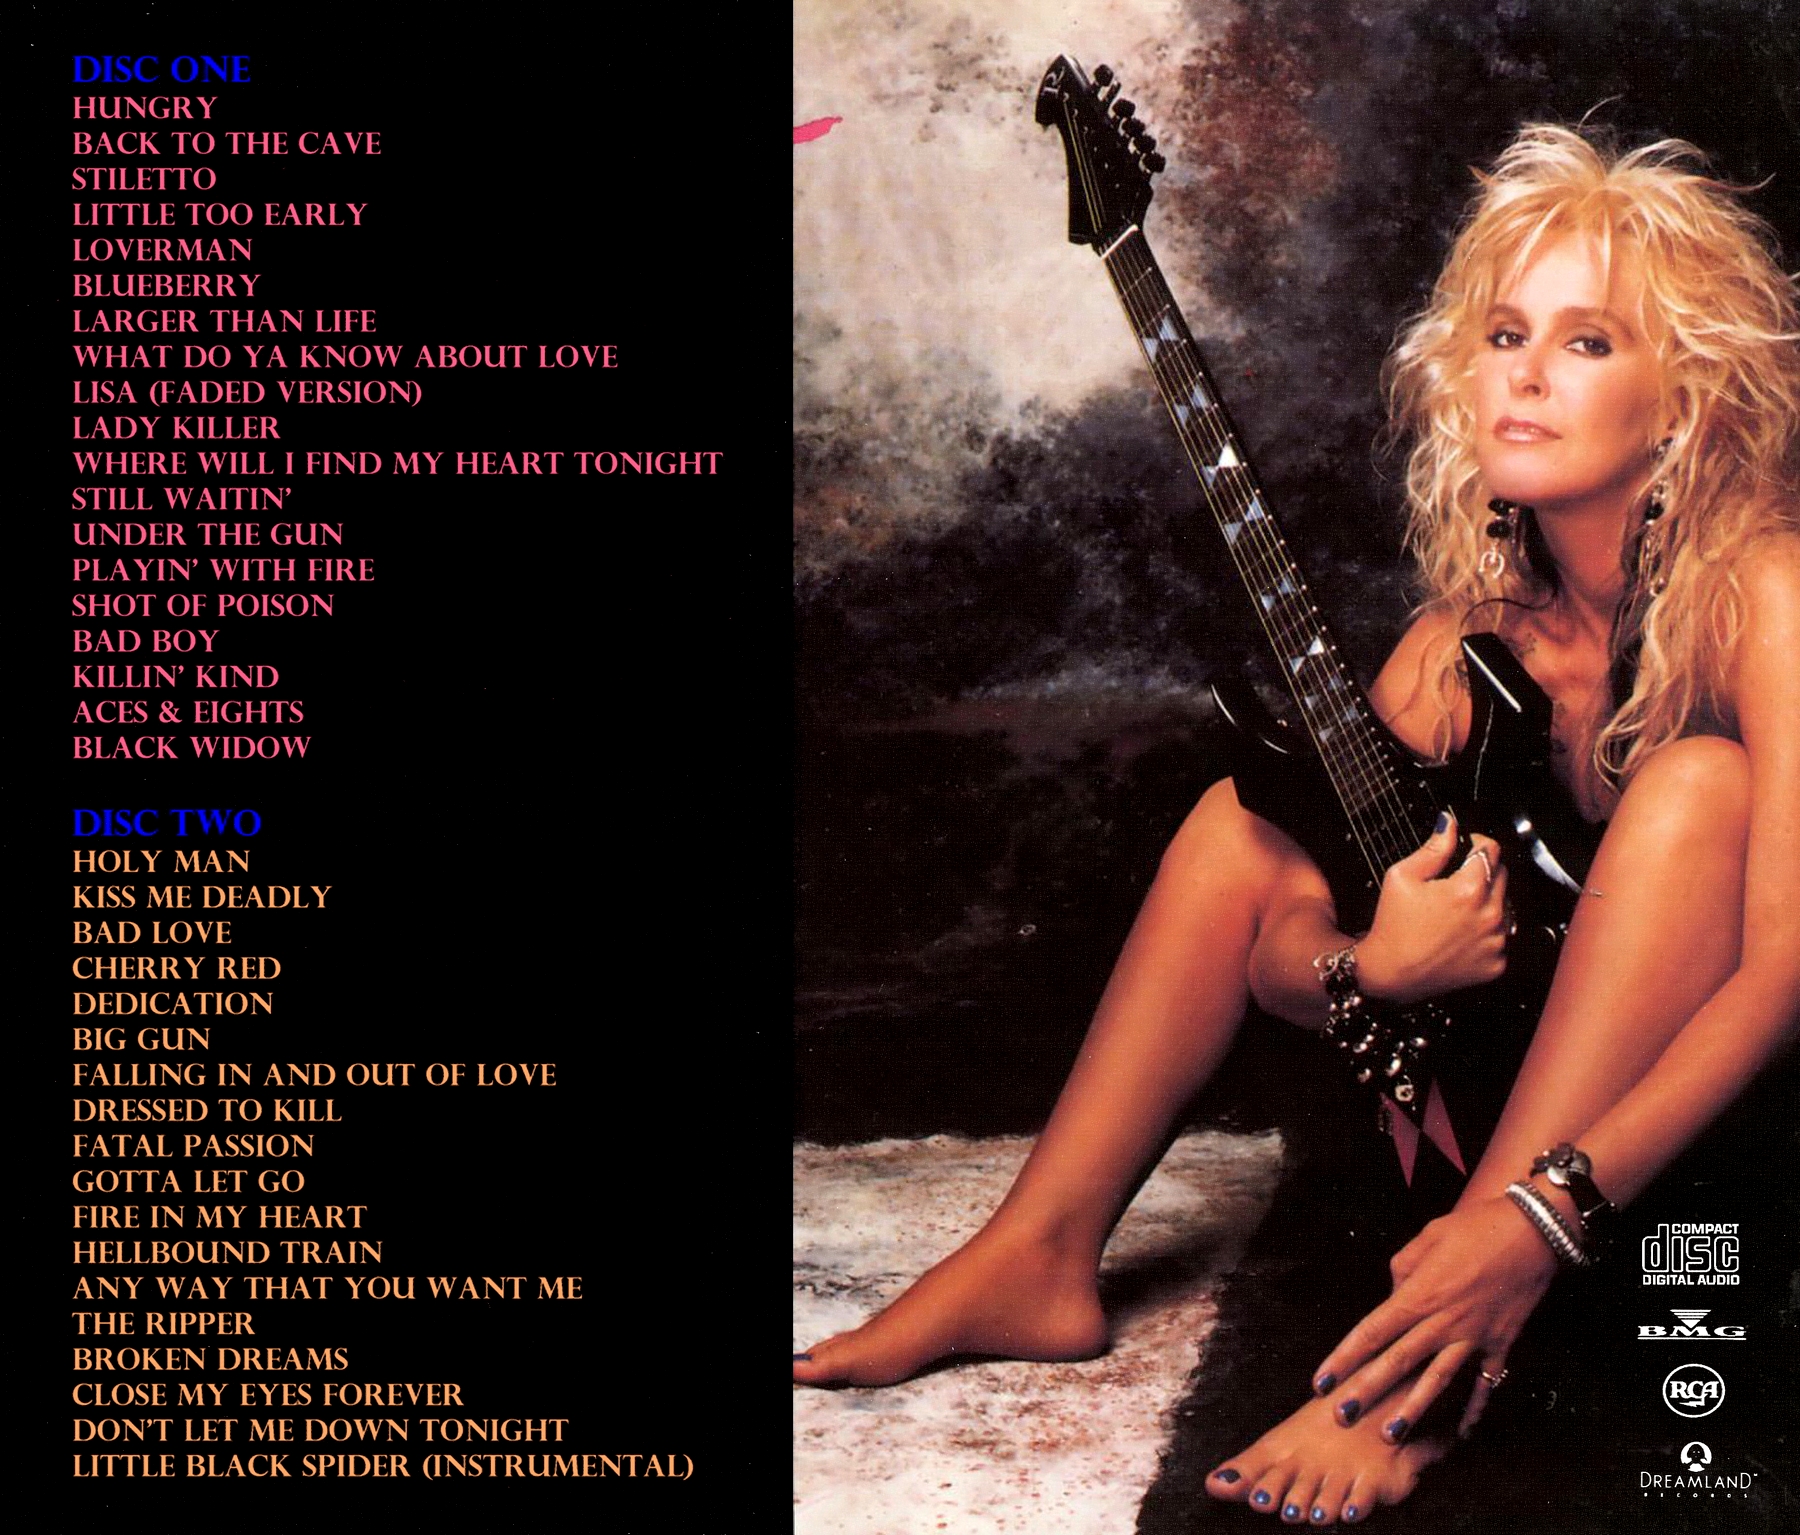 Lita Ford - The Best Of 1983-1995 (2011) b.jpg- Viewing image -The Picture ...